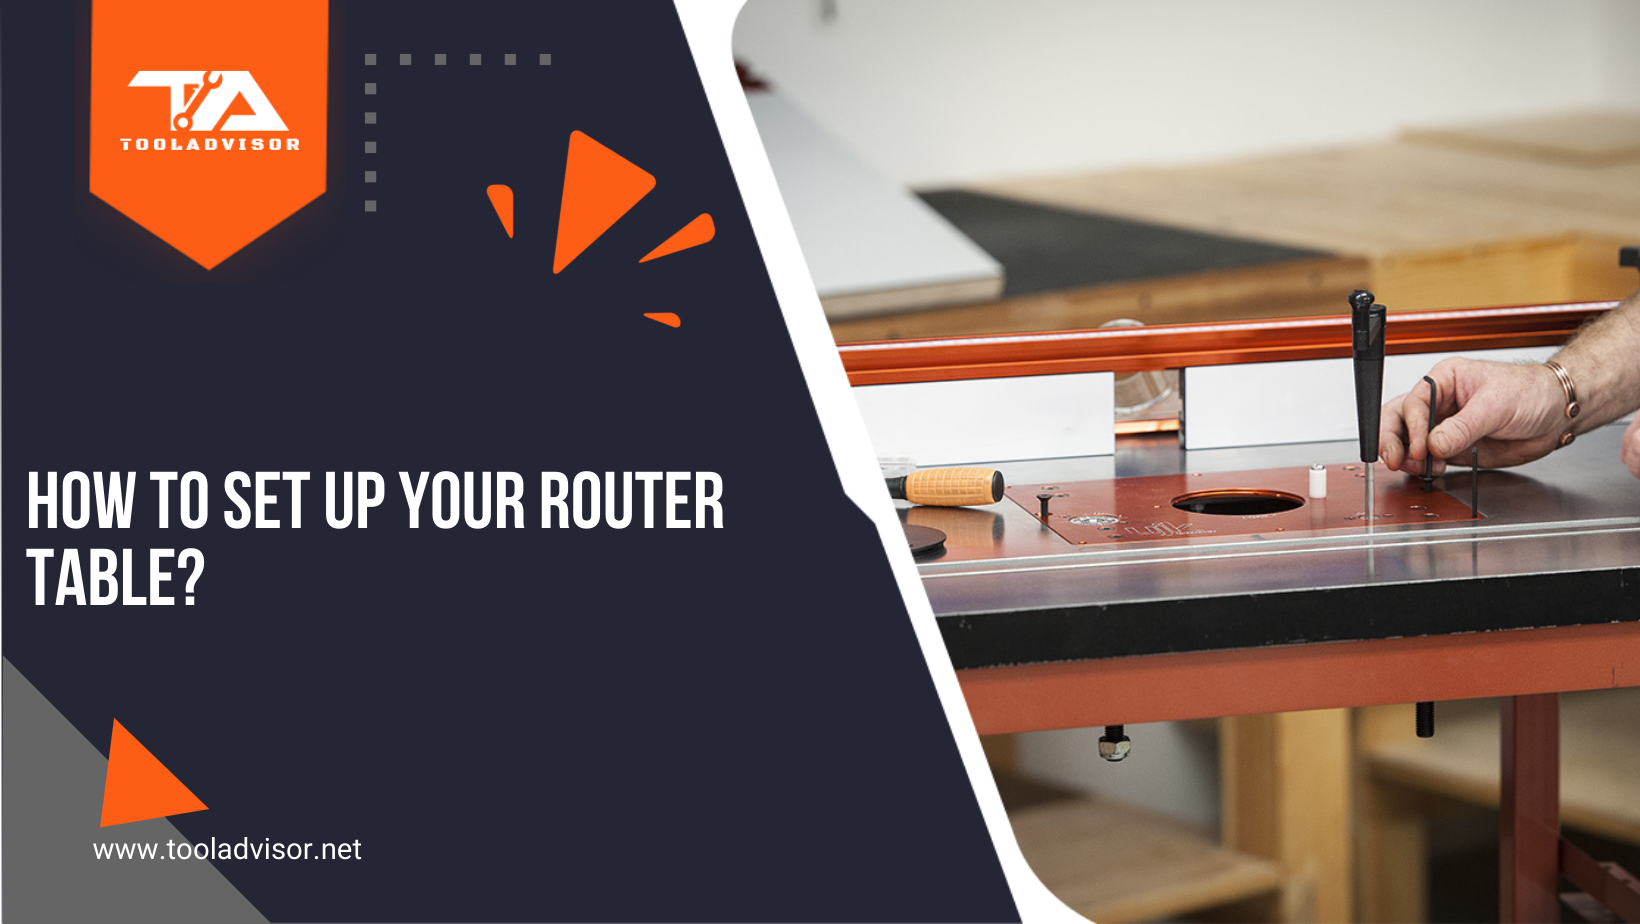 How to Set Up Your Router Table